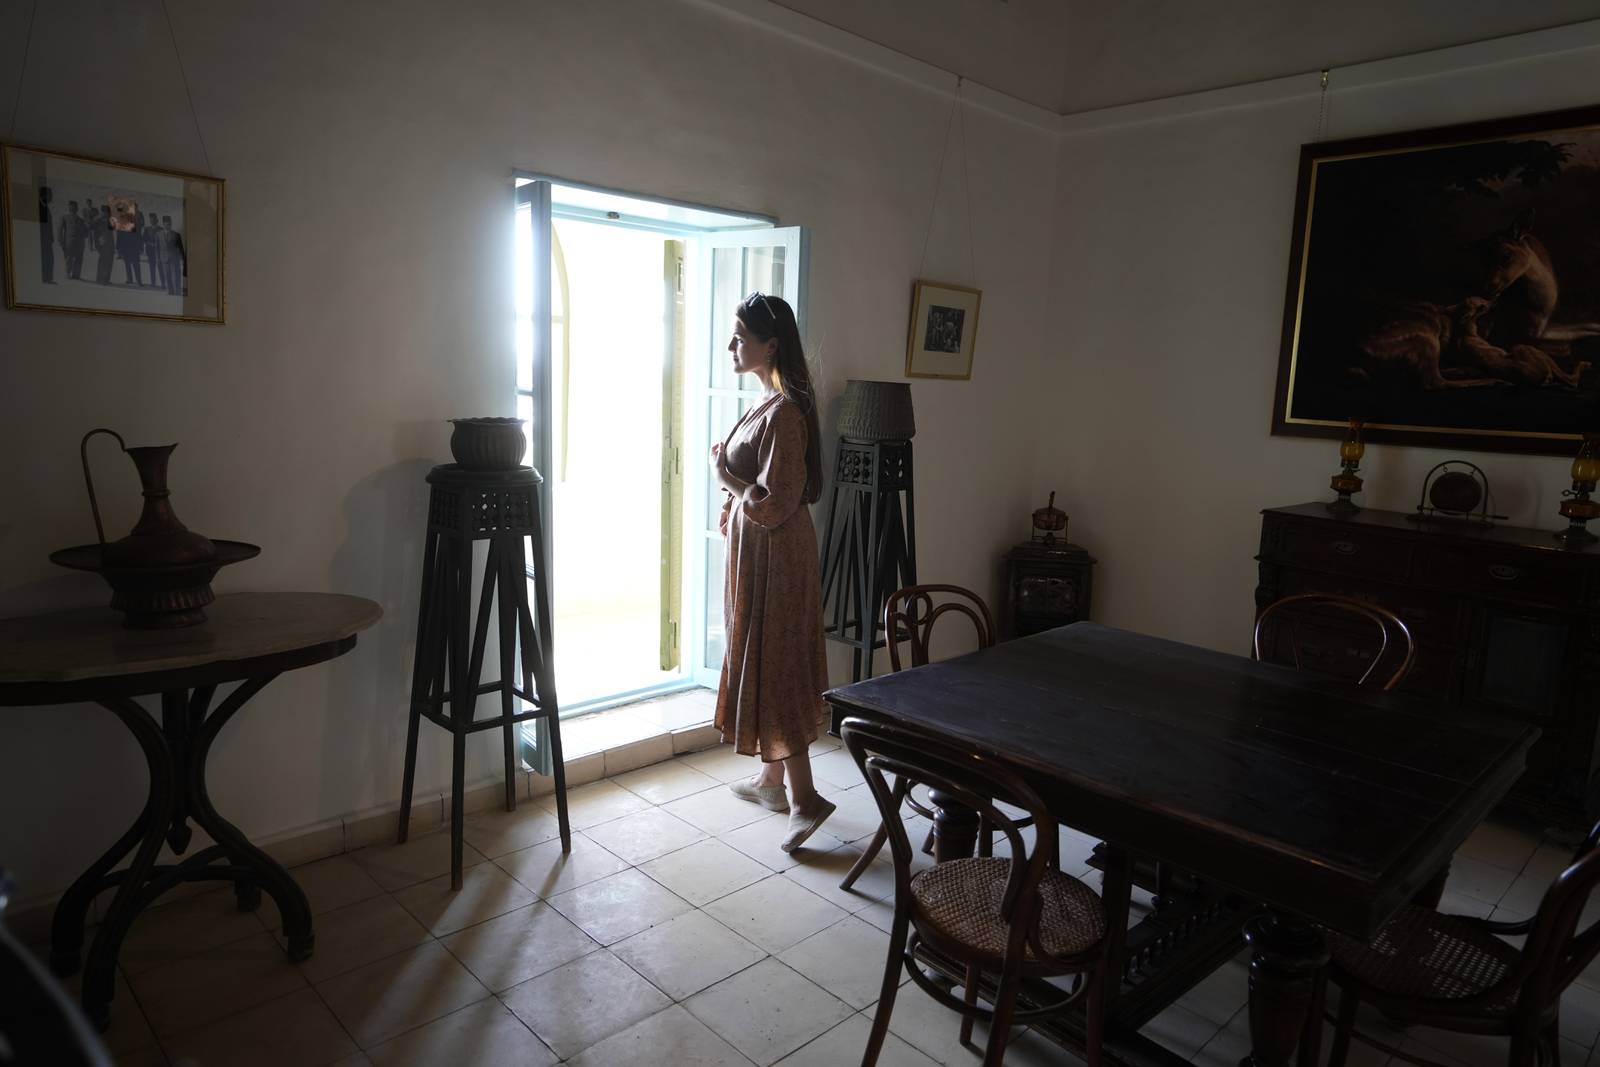 Elizaveta Yukhnyova, a visitor from Russia, tours the renovated former home of British archaeologist Howard Carter in the Valley of the Kings in Luxor. AP